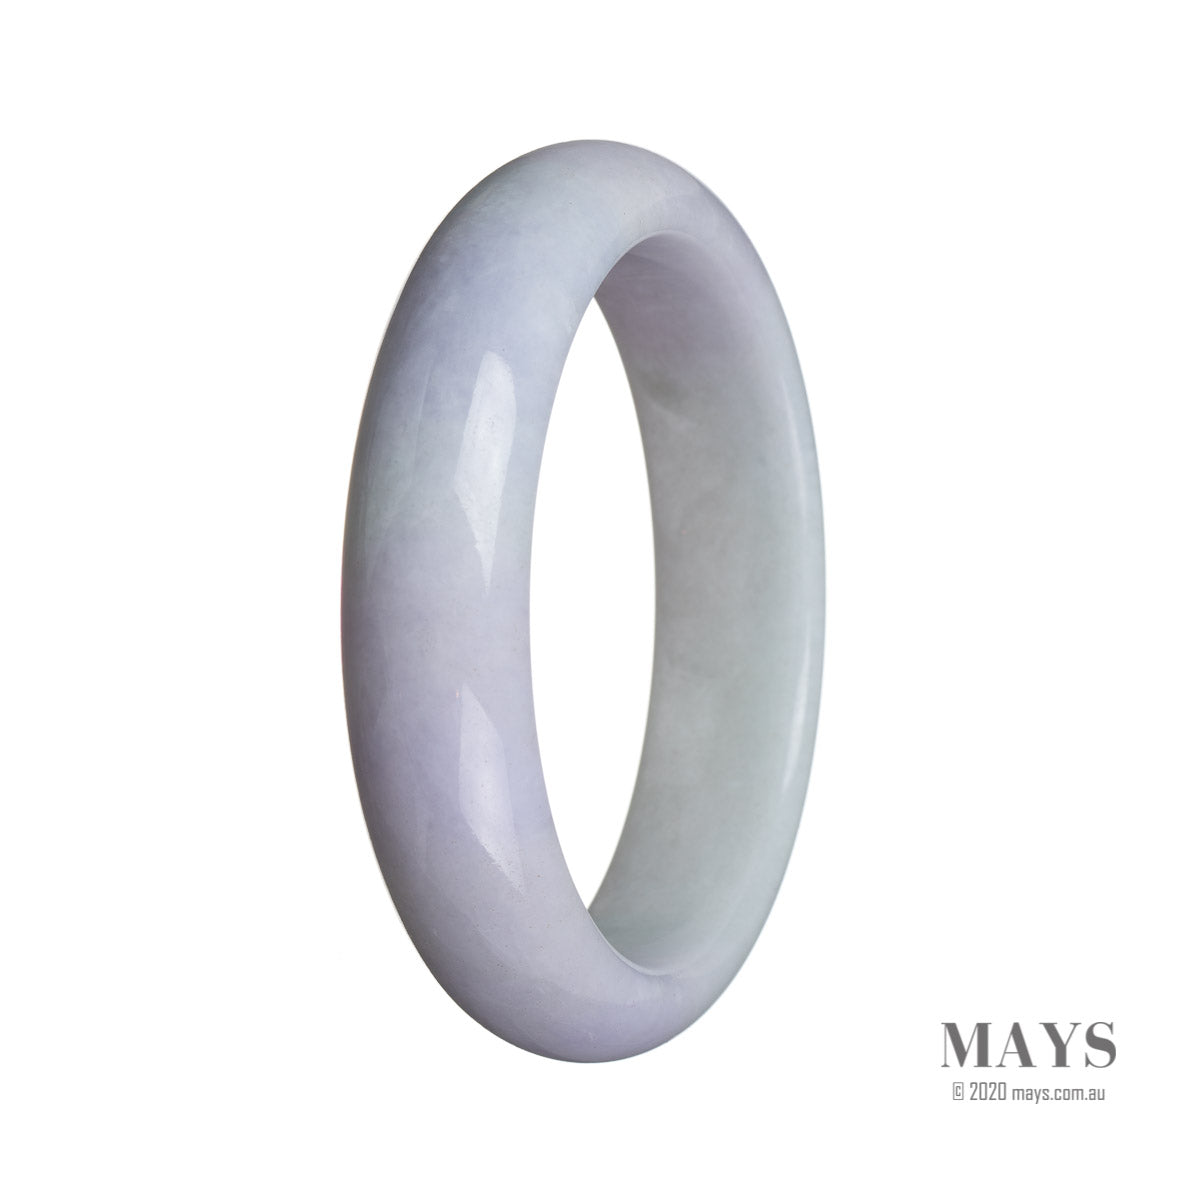 A close-up image of a lavender jadeite bangle bracelet, featuring a half-moon shape and measuring 59mm in diameter.